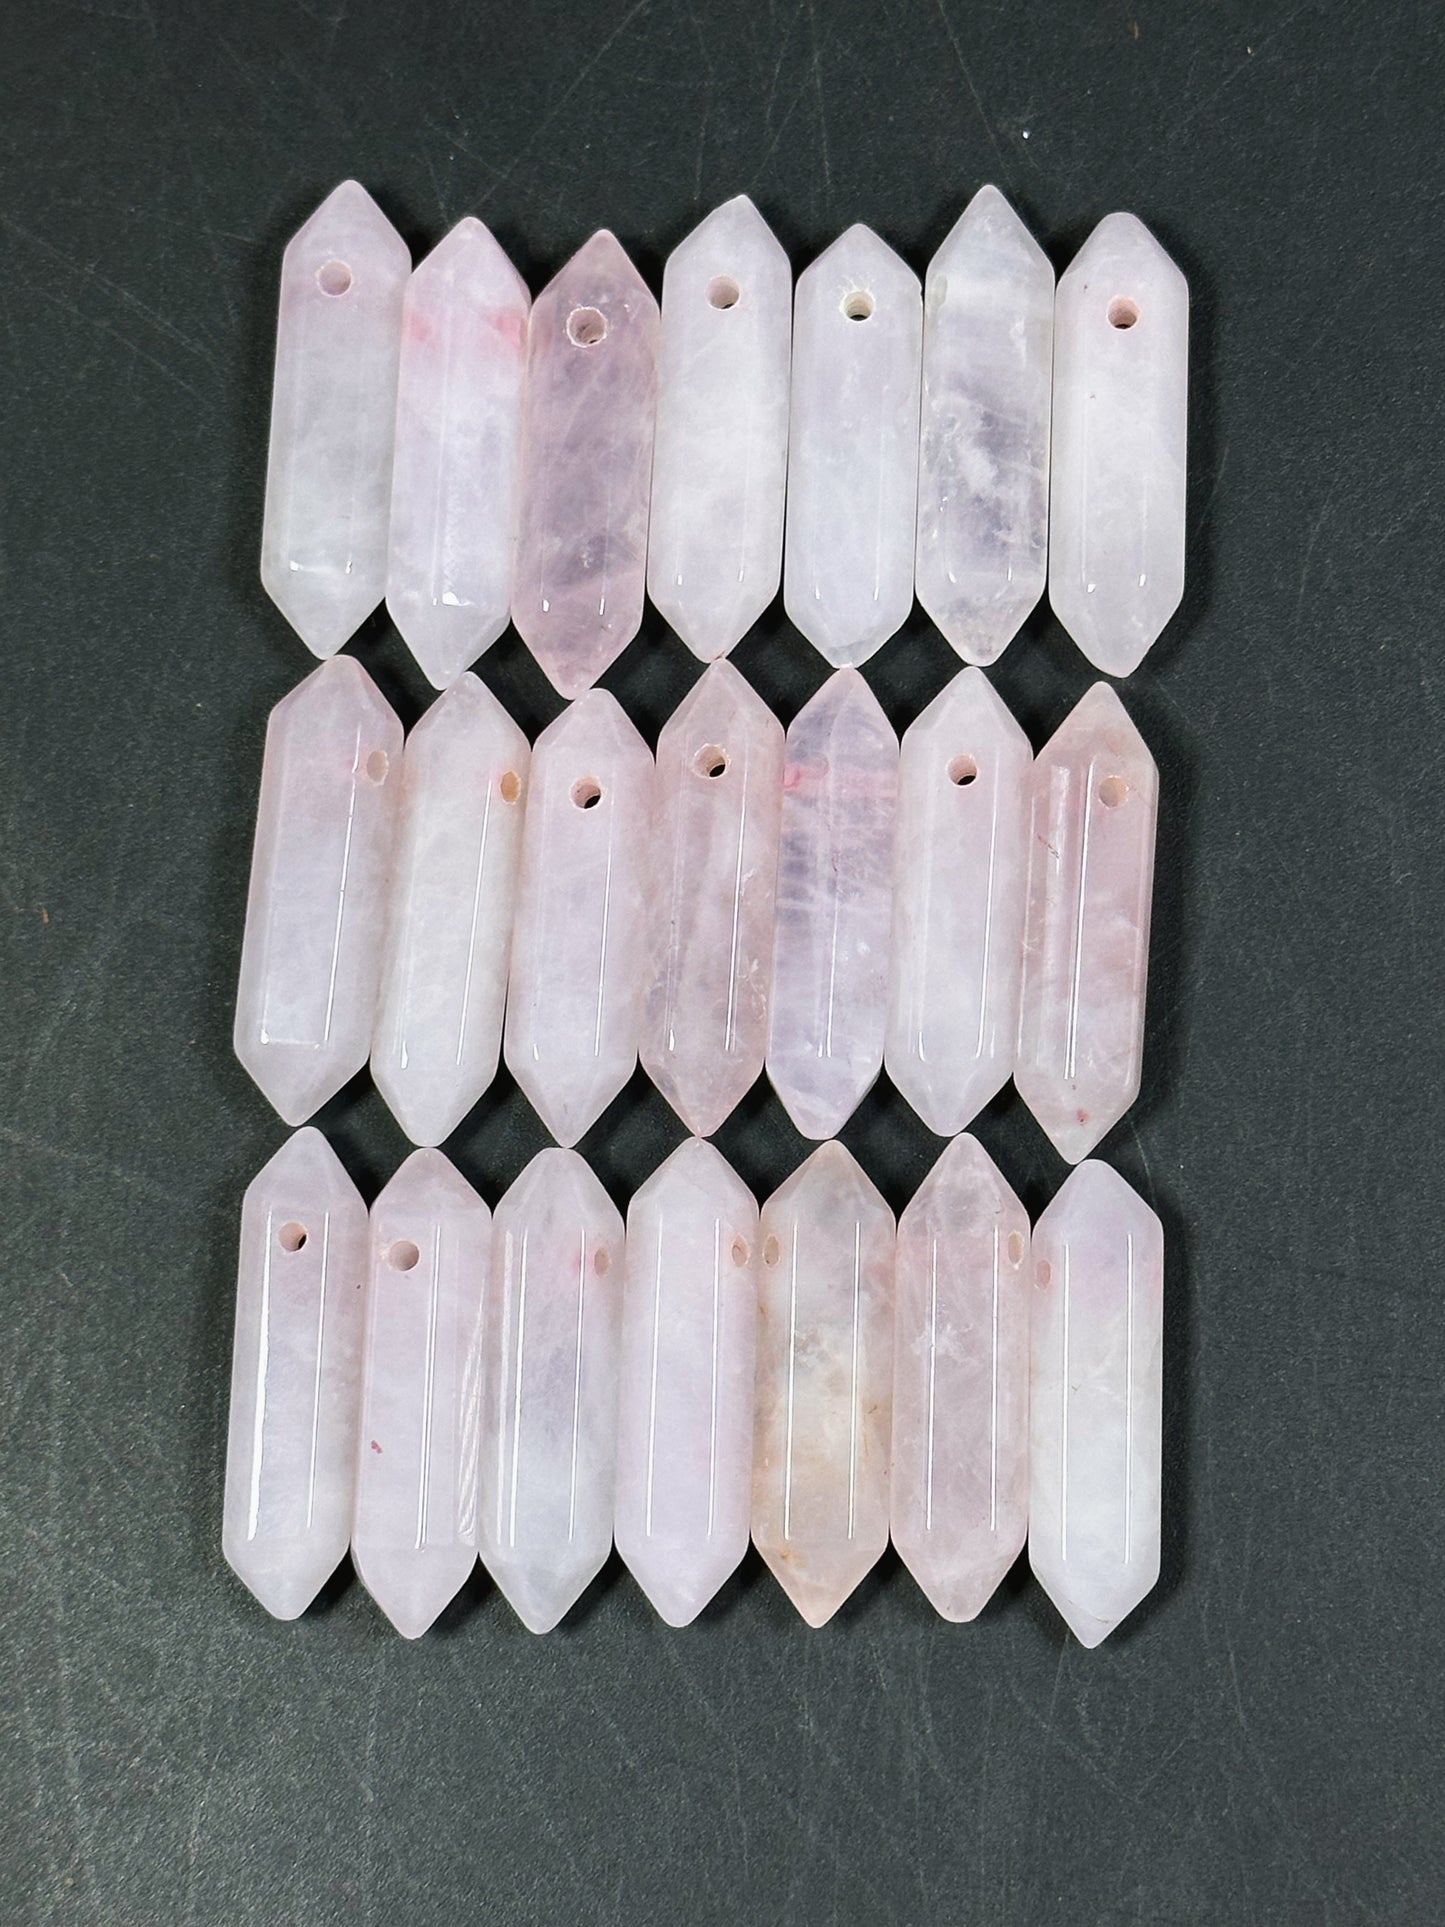 AAA Natural Rose Quartz Gemstone Bead Faceted 33x8mm Double Point Shape Beautiful Natural Pink Rose Quartz Gemstone Bead Focal Pendant Piece